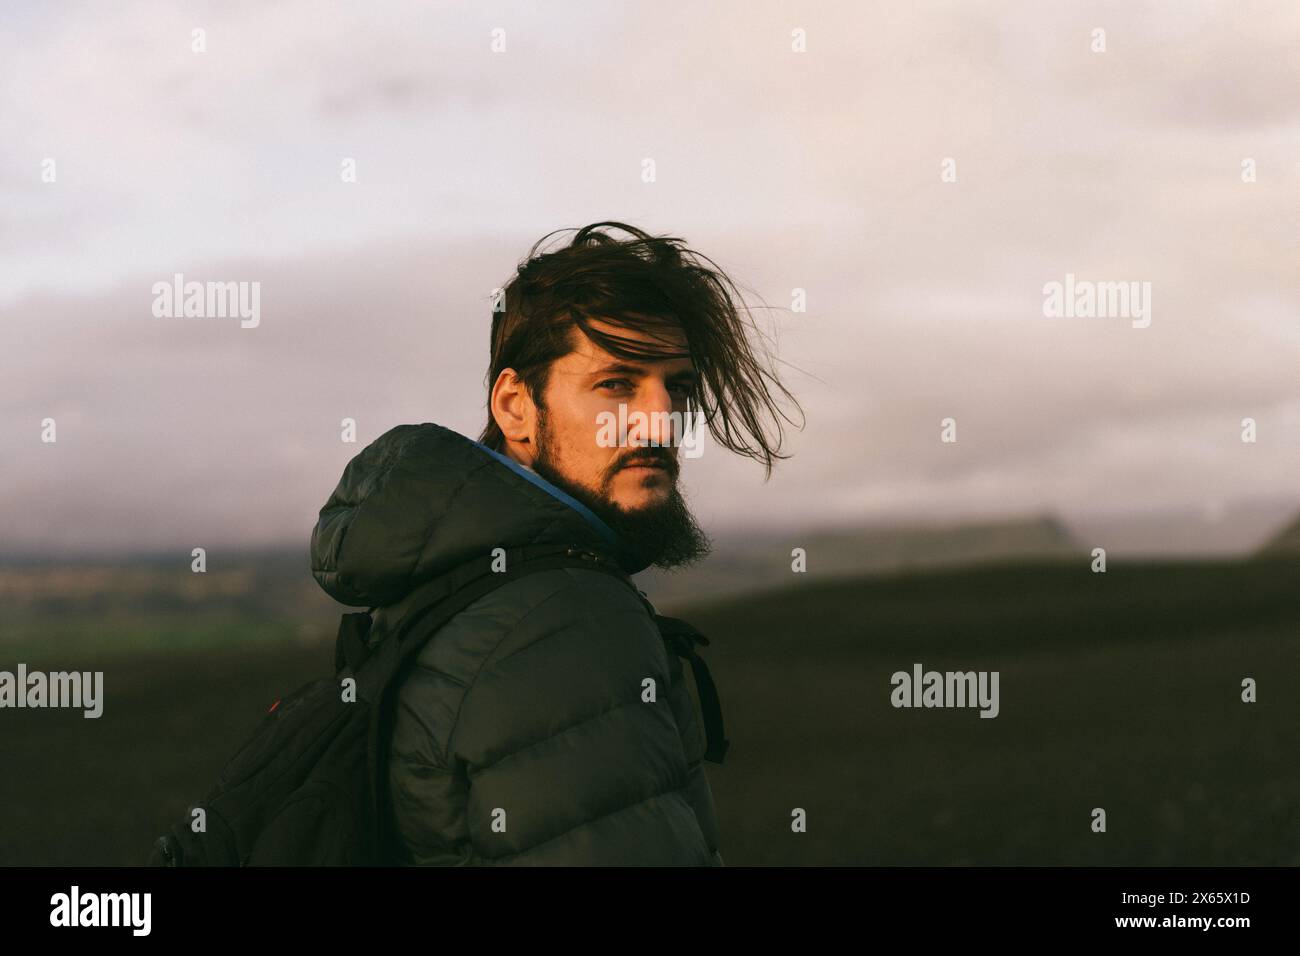 Man traveler with a backpack in Iceland. Stock Photo